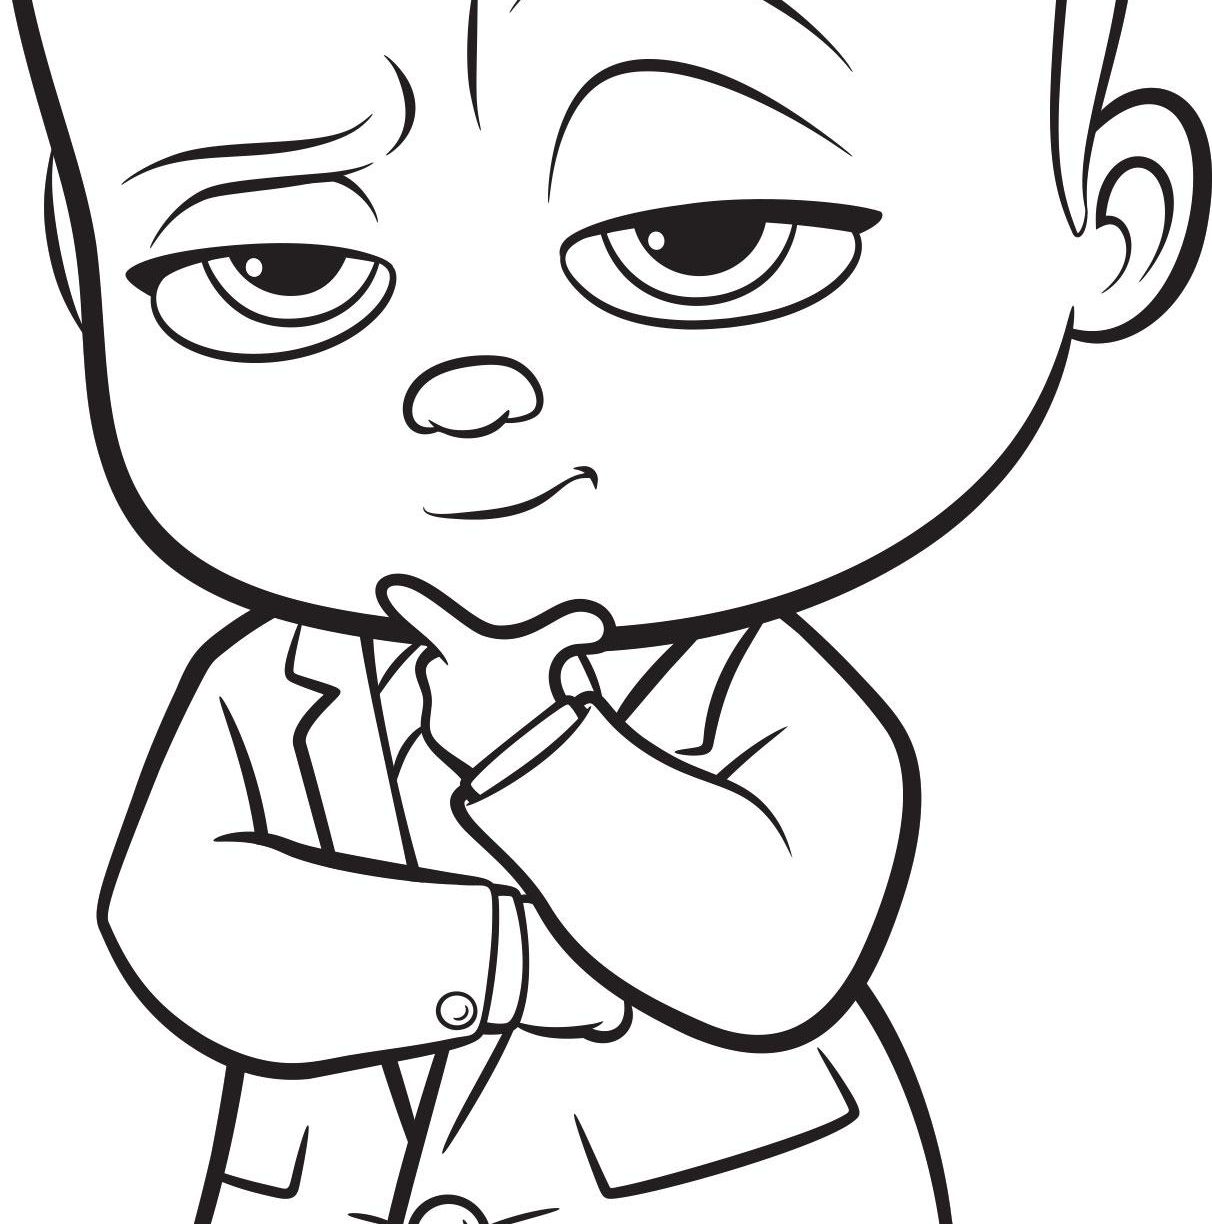 the-boss-baby-coloring-pages-at-getcolorings-free-printable-colorings-pages-to-print-and-color